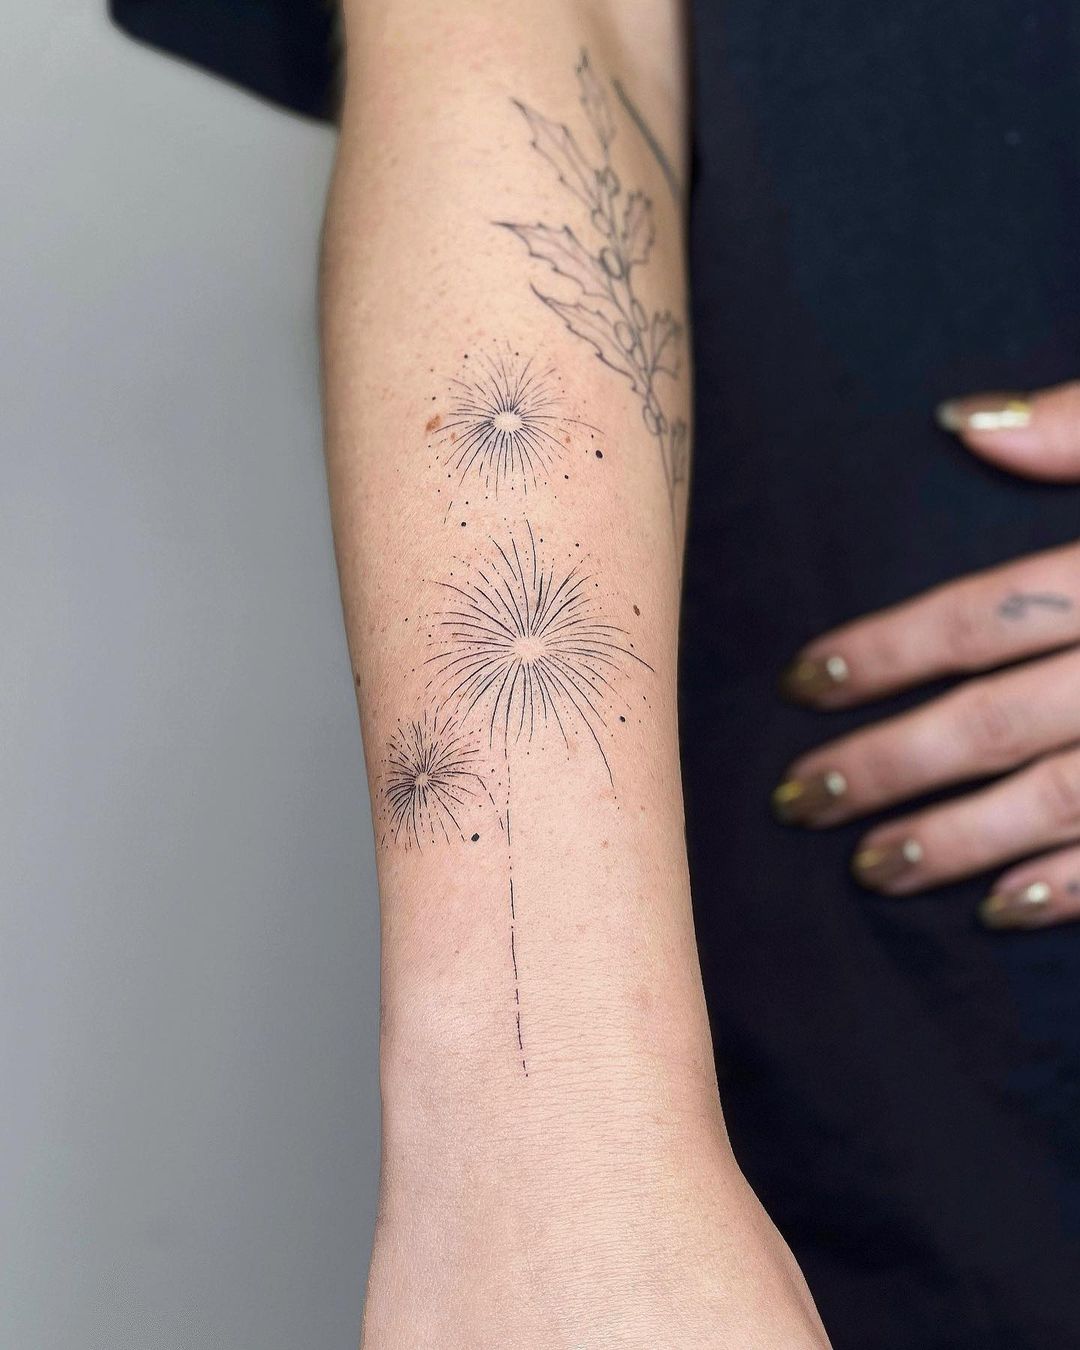 Firework tattoo on forearm by nothingwildtattoo